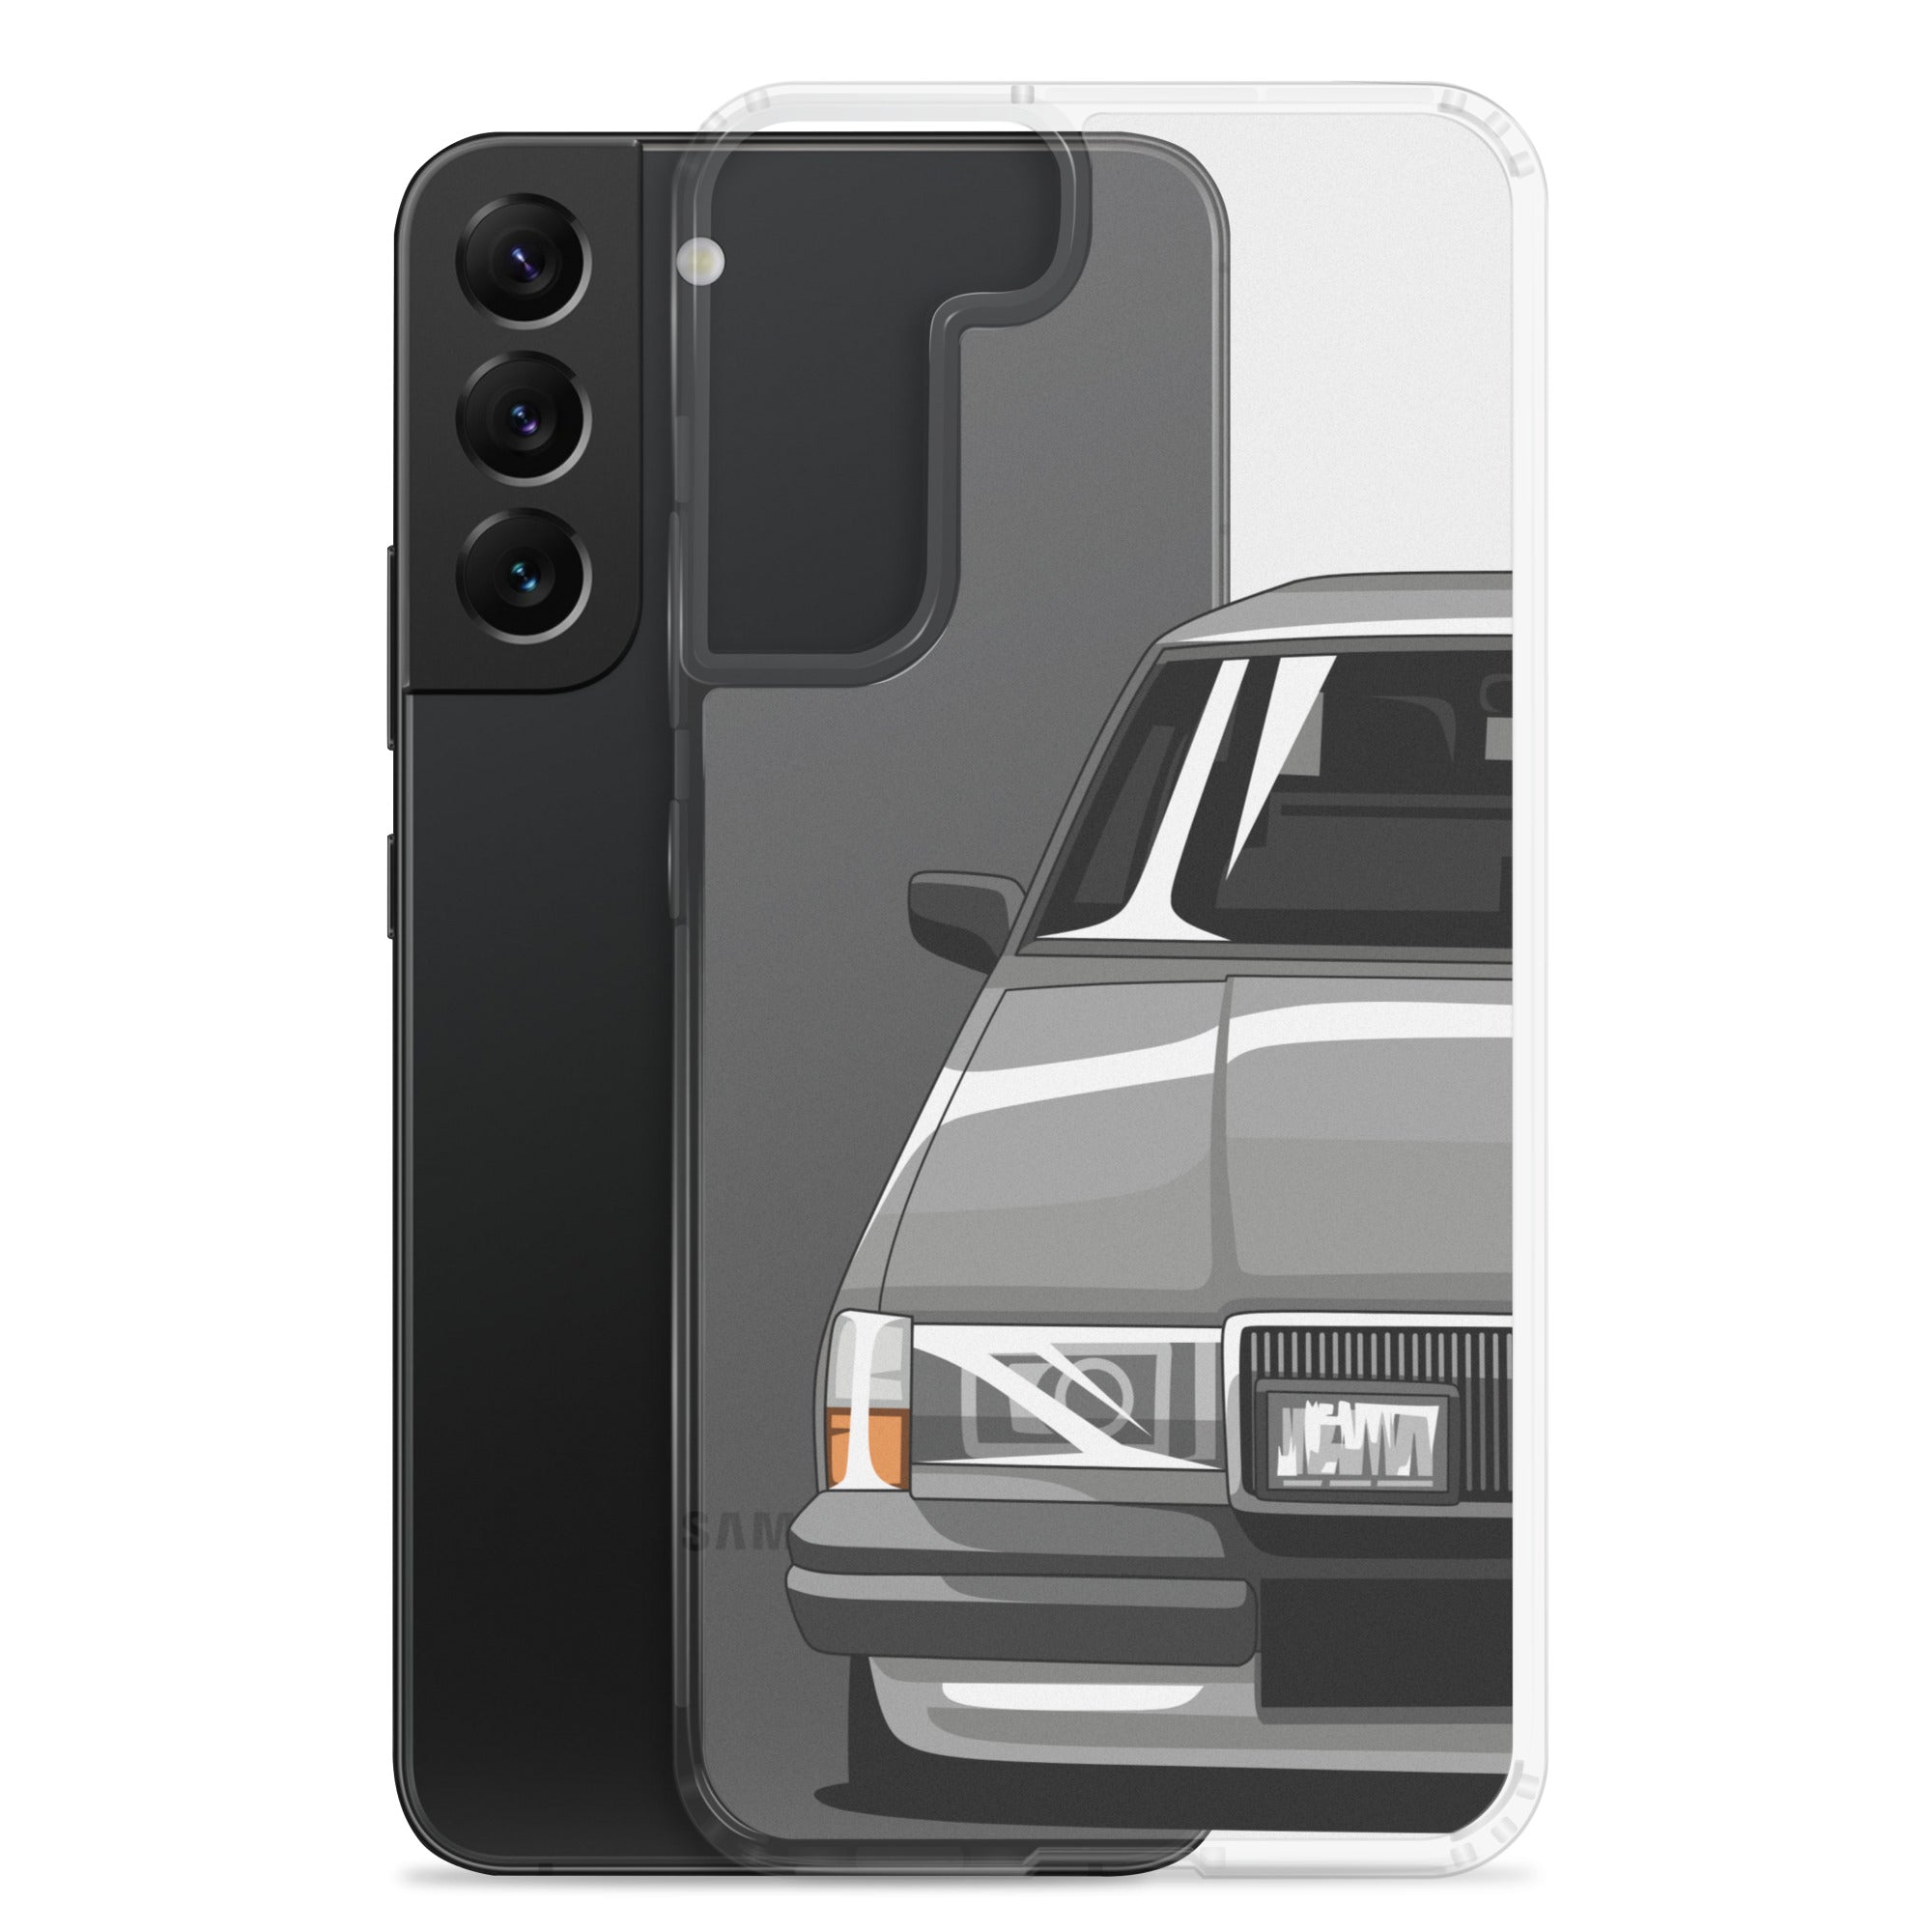 Your Car/Truck/Motorcycle - Samsung Personal Phone Case (Transparent)